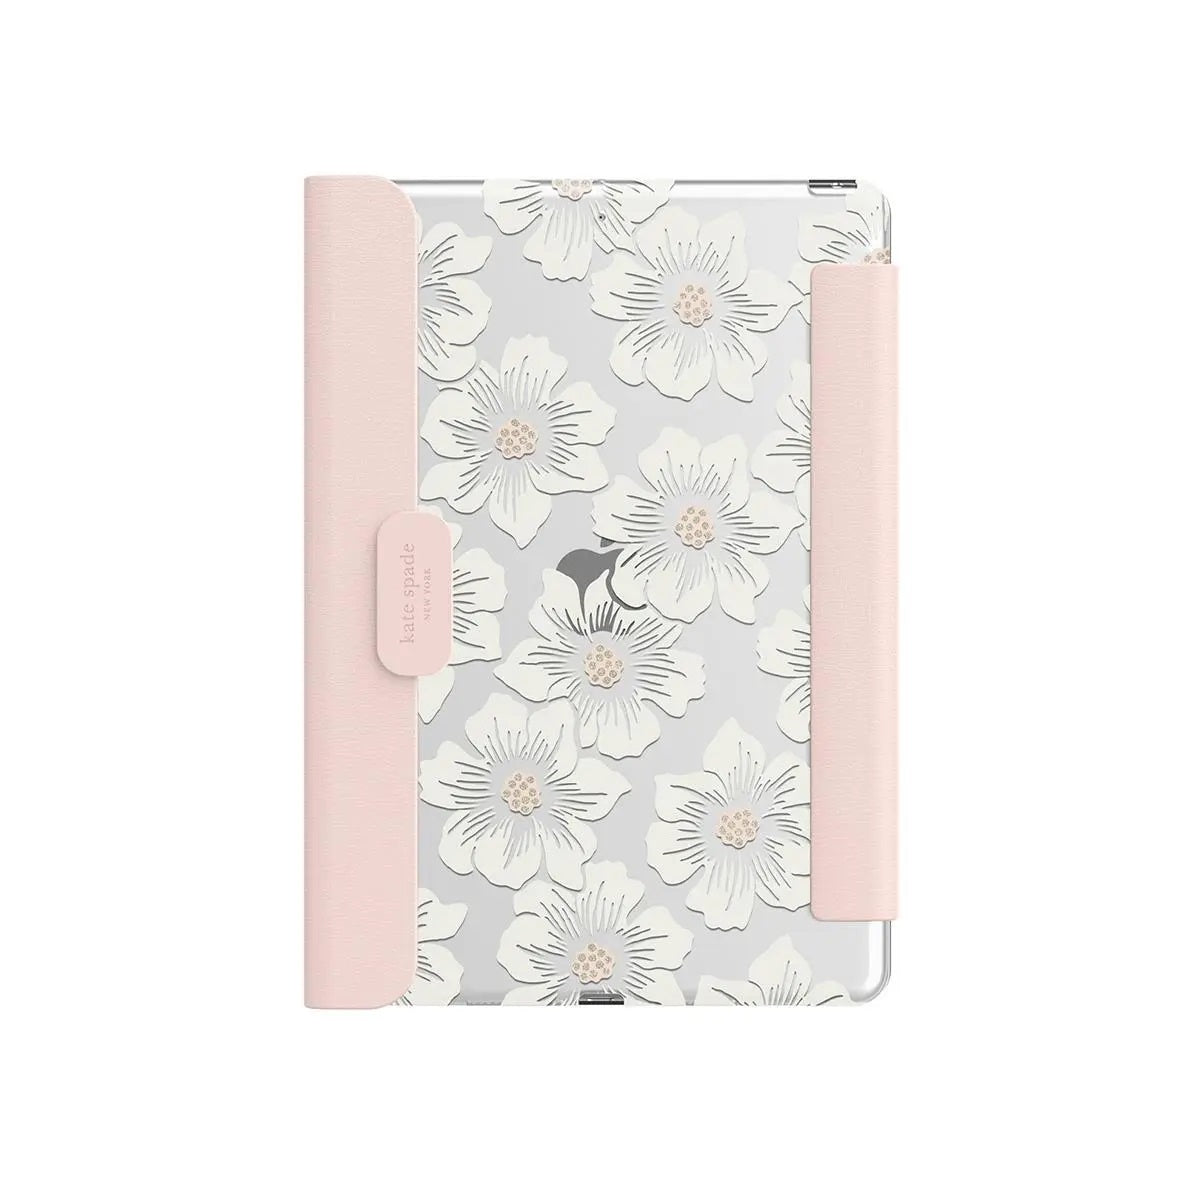 Kate Spade New York Protective Folio Case for iPad Mini 6th Gen(Hollyhock Floral)